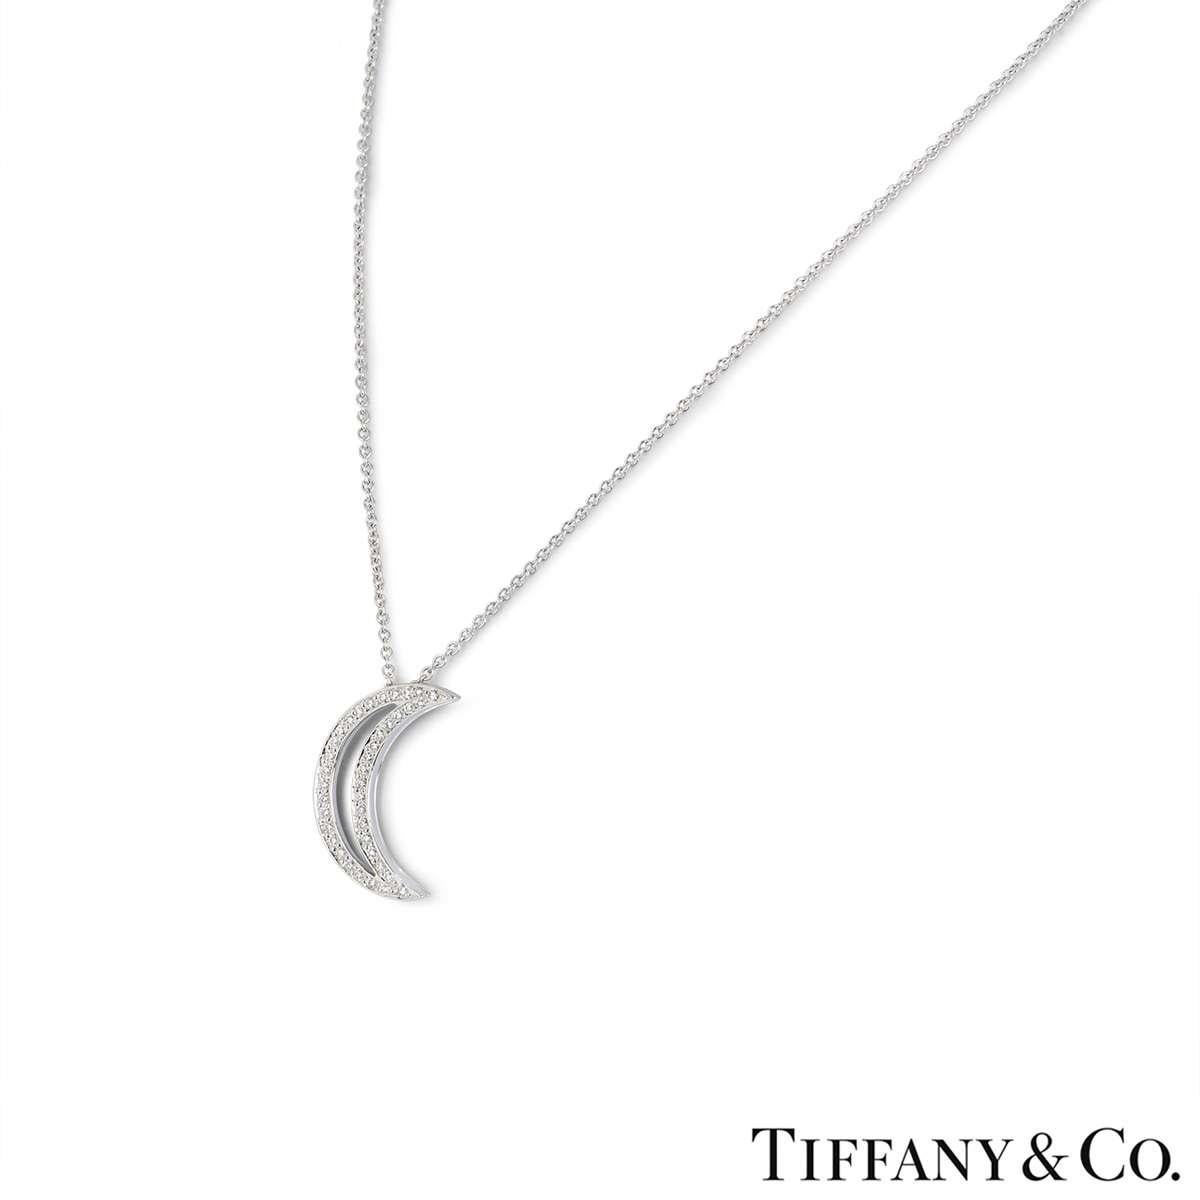 A platinum Moon pendant by Tiffany & Co. The pendant features an openwork Moon motif set with round brilliant cut diamonds totalling 0.16ct. The motif measures 2cm in length and comes on an original 16 inch chain, complete with bolt ring clasp. The